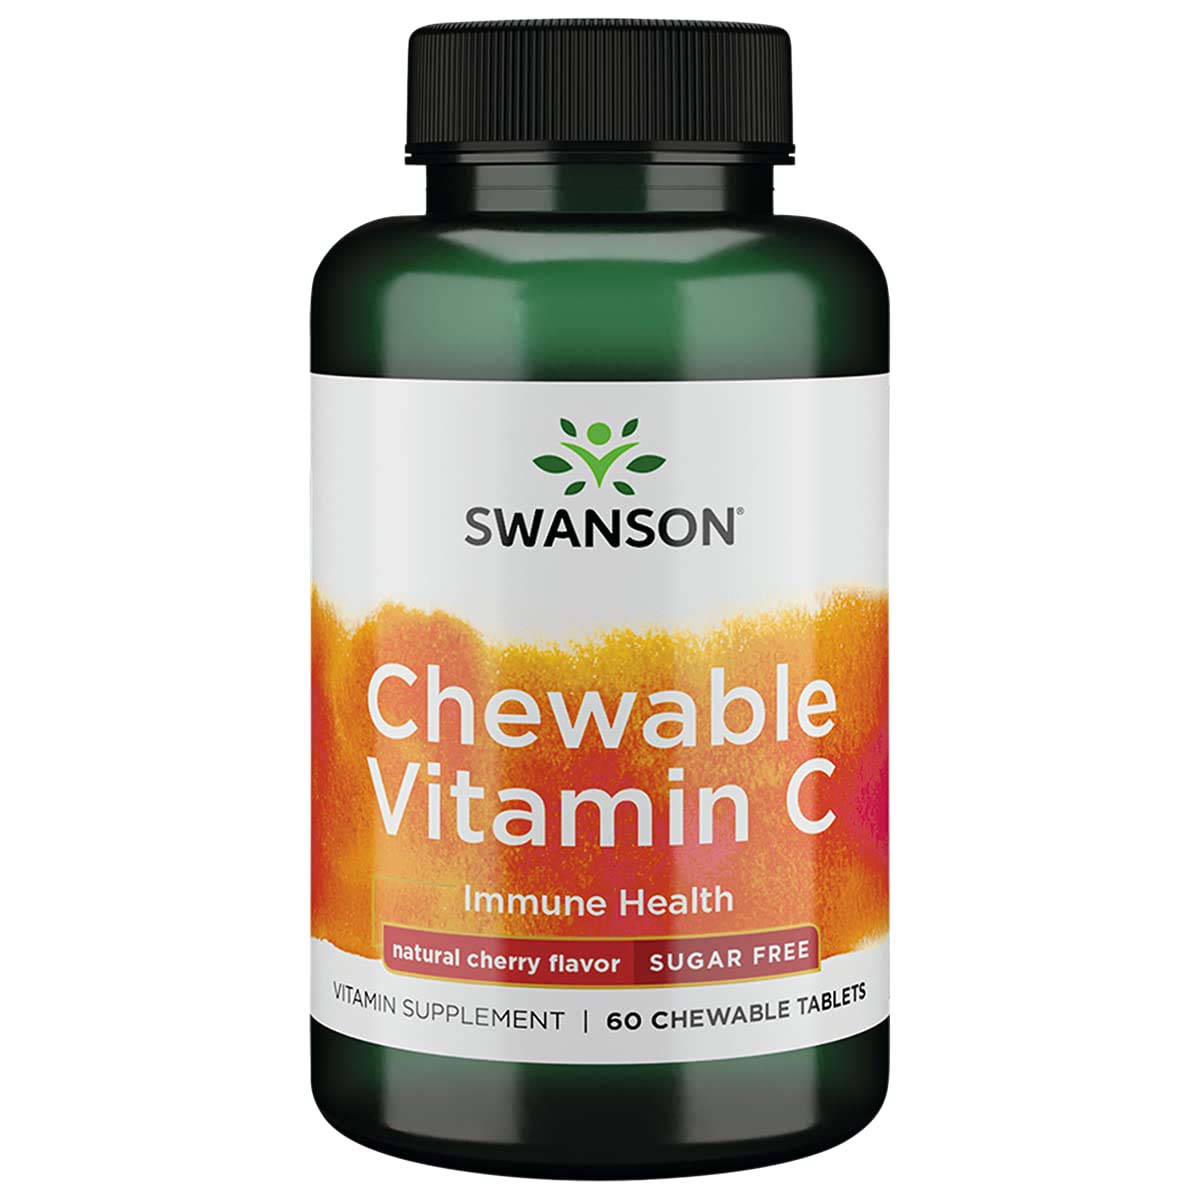 Swanson Chewable Vitamin C 60 Chewable Tablets Cherry